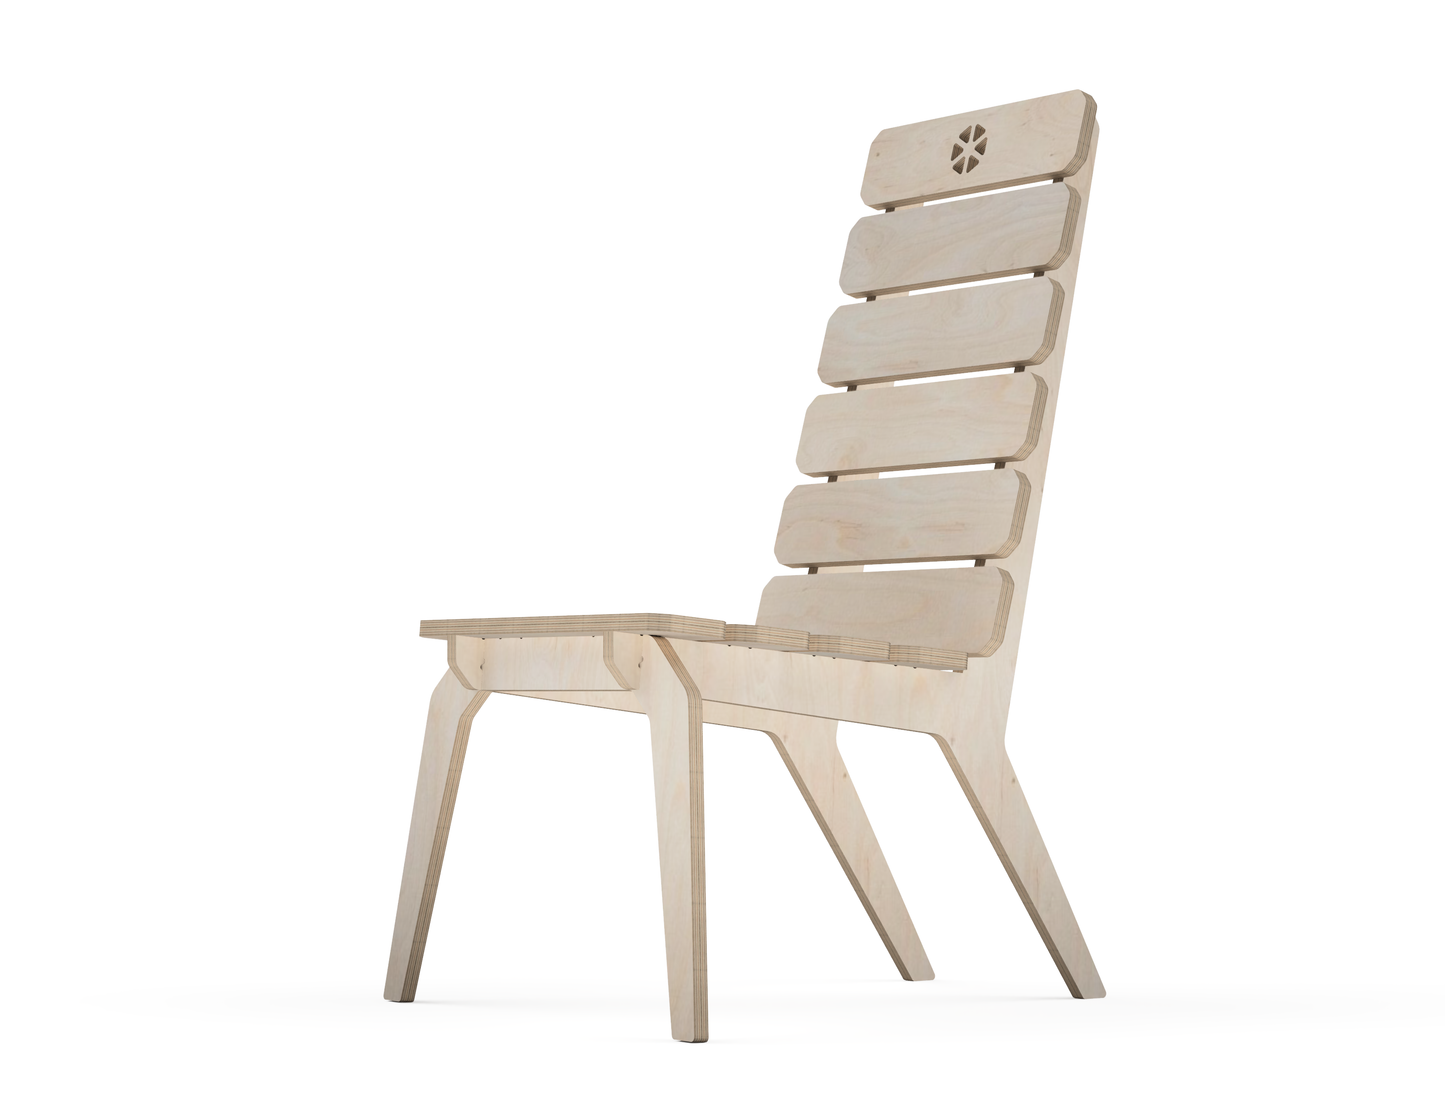 Lounge chair DXF file